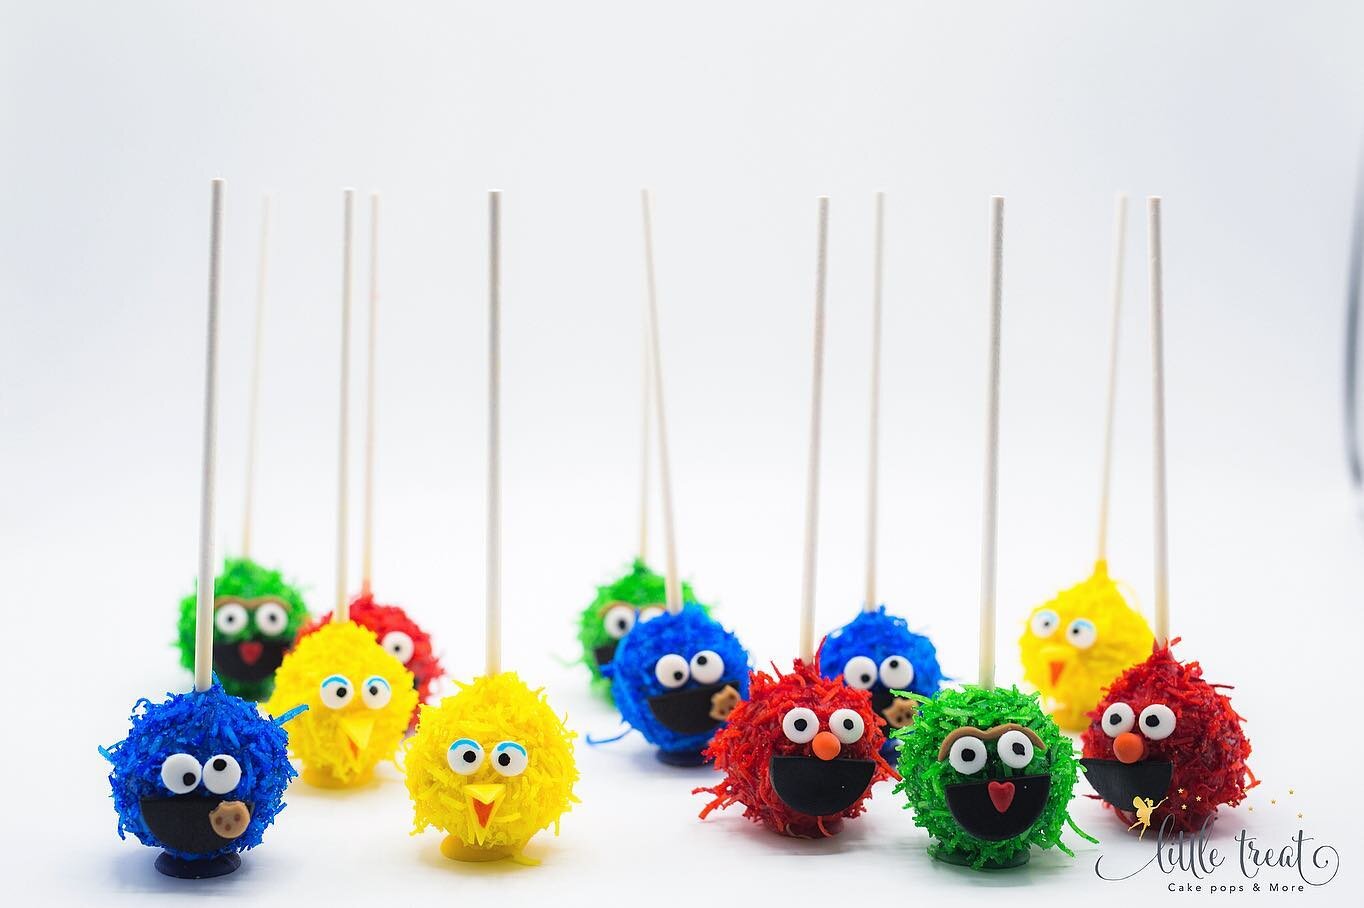 🎶 Sunny day ☀️ 
Can you tell me how to get?
How to get to Sesame Street? 🎵🎶 
.
.
#cakepops #sesamestreet #treats  #cookiemonster #bigbird #elmocakepops #instacakepops #seasamestreetcakepops #sesamestreetparty #cupcakes #sweettooth #event #party #d